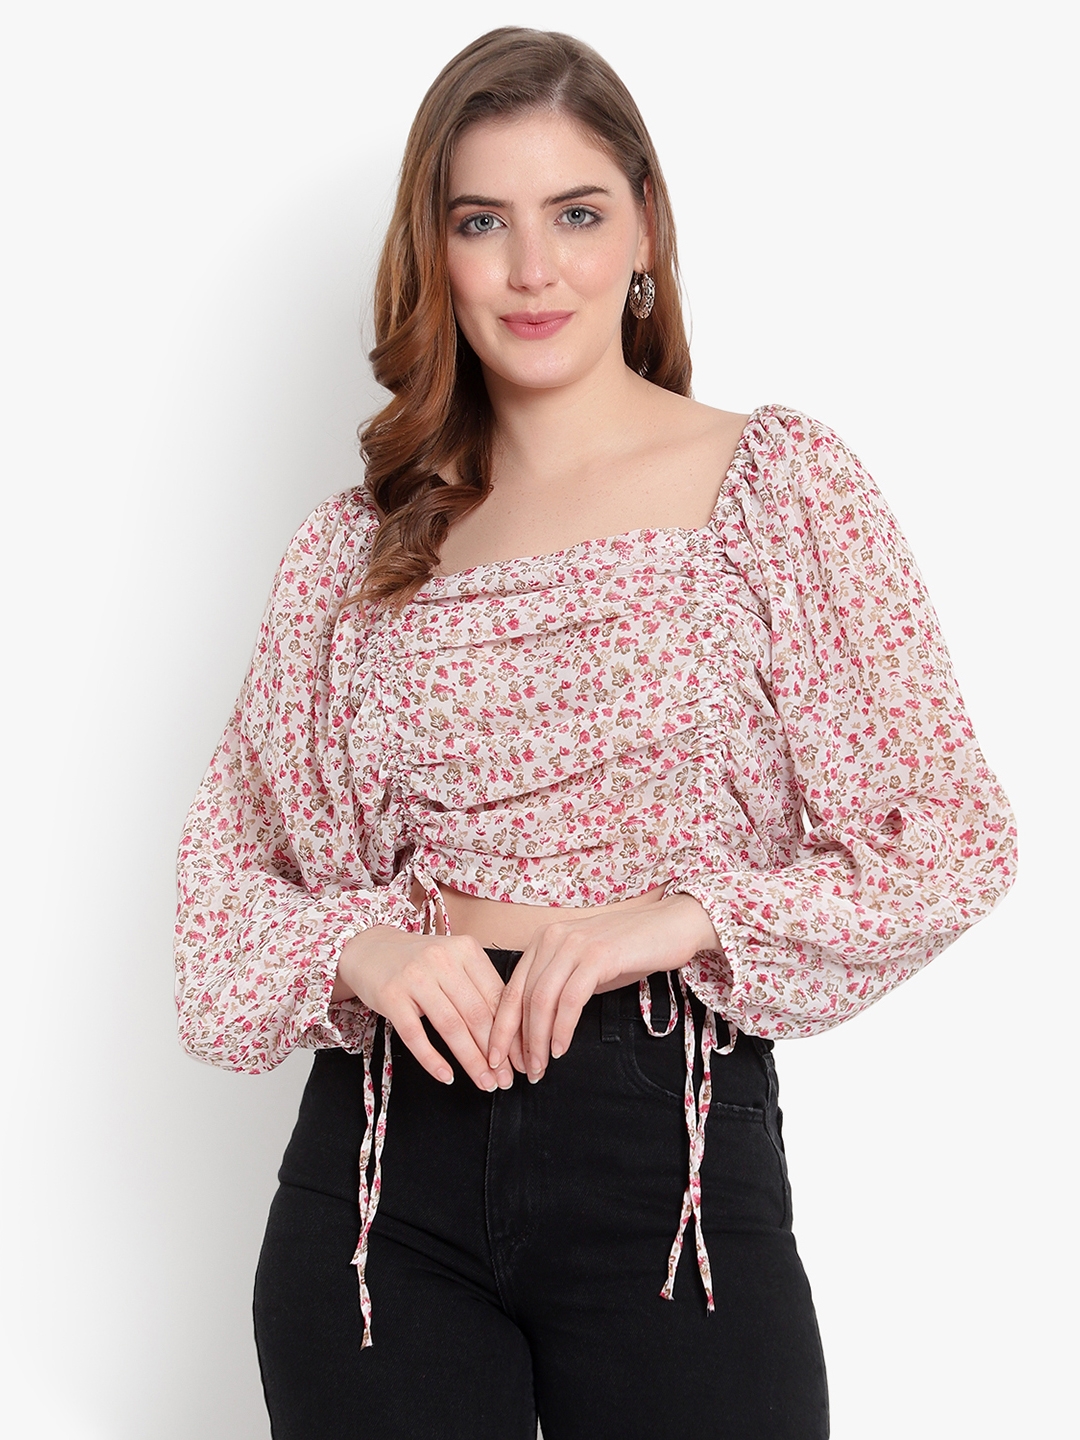 ANKLES | ANKLES Casual Solid White Multi Color Puffed Sleeves Crop Top 